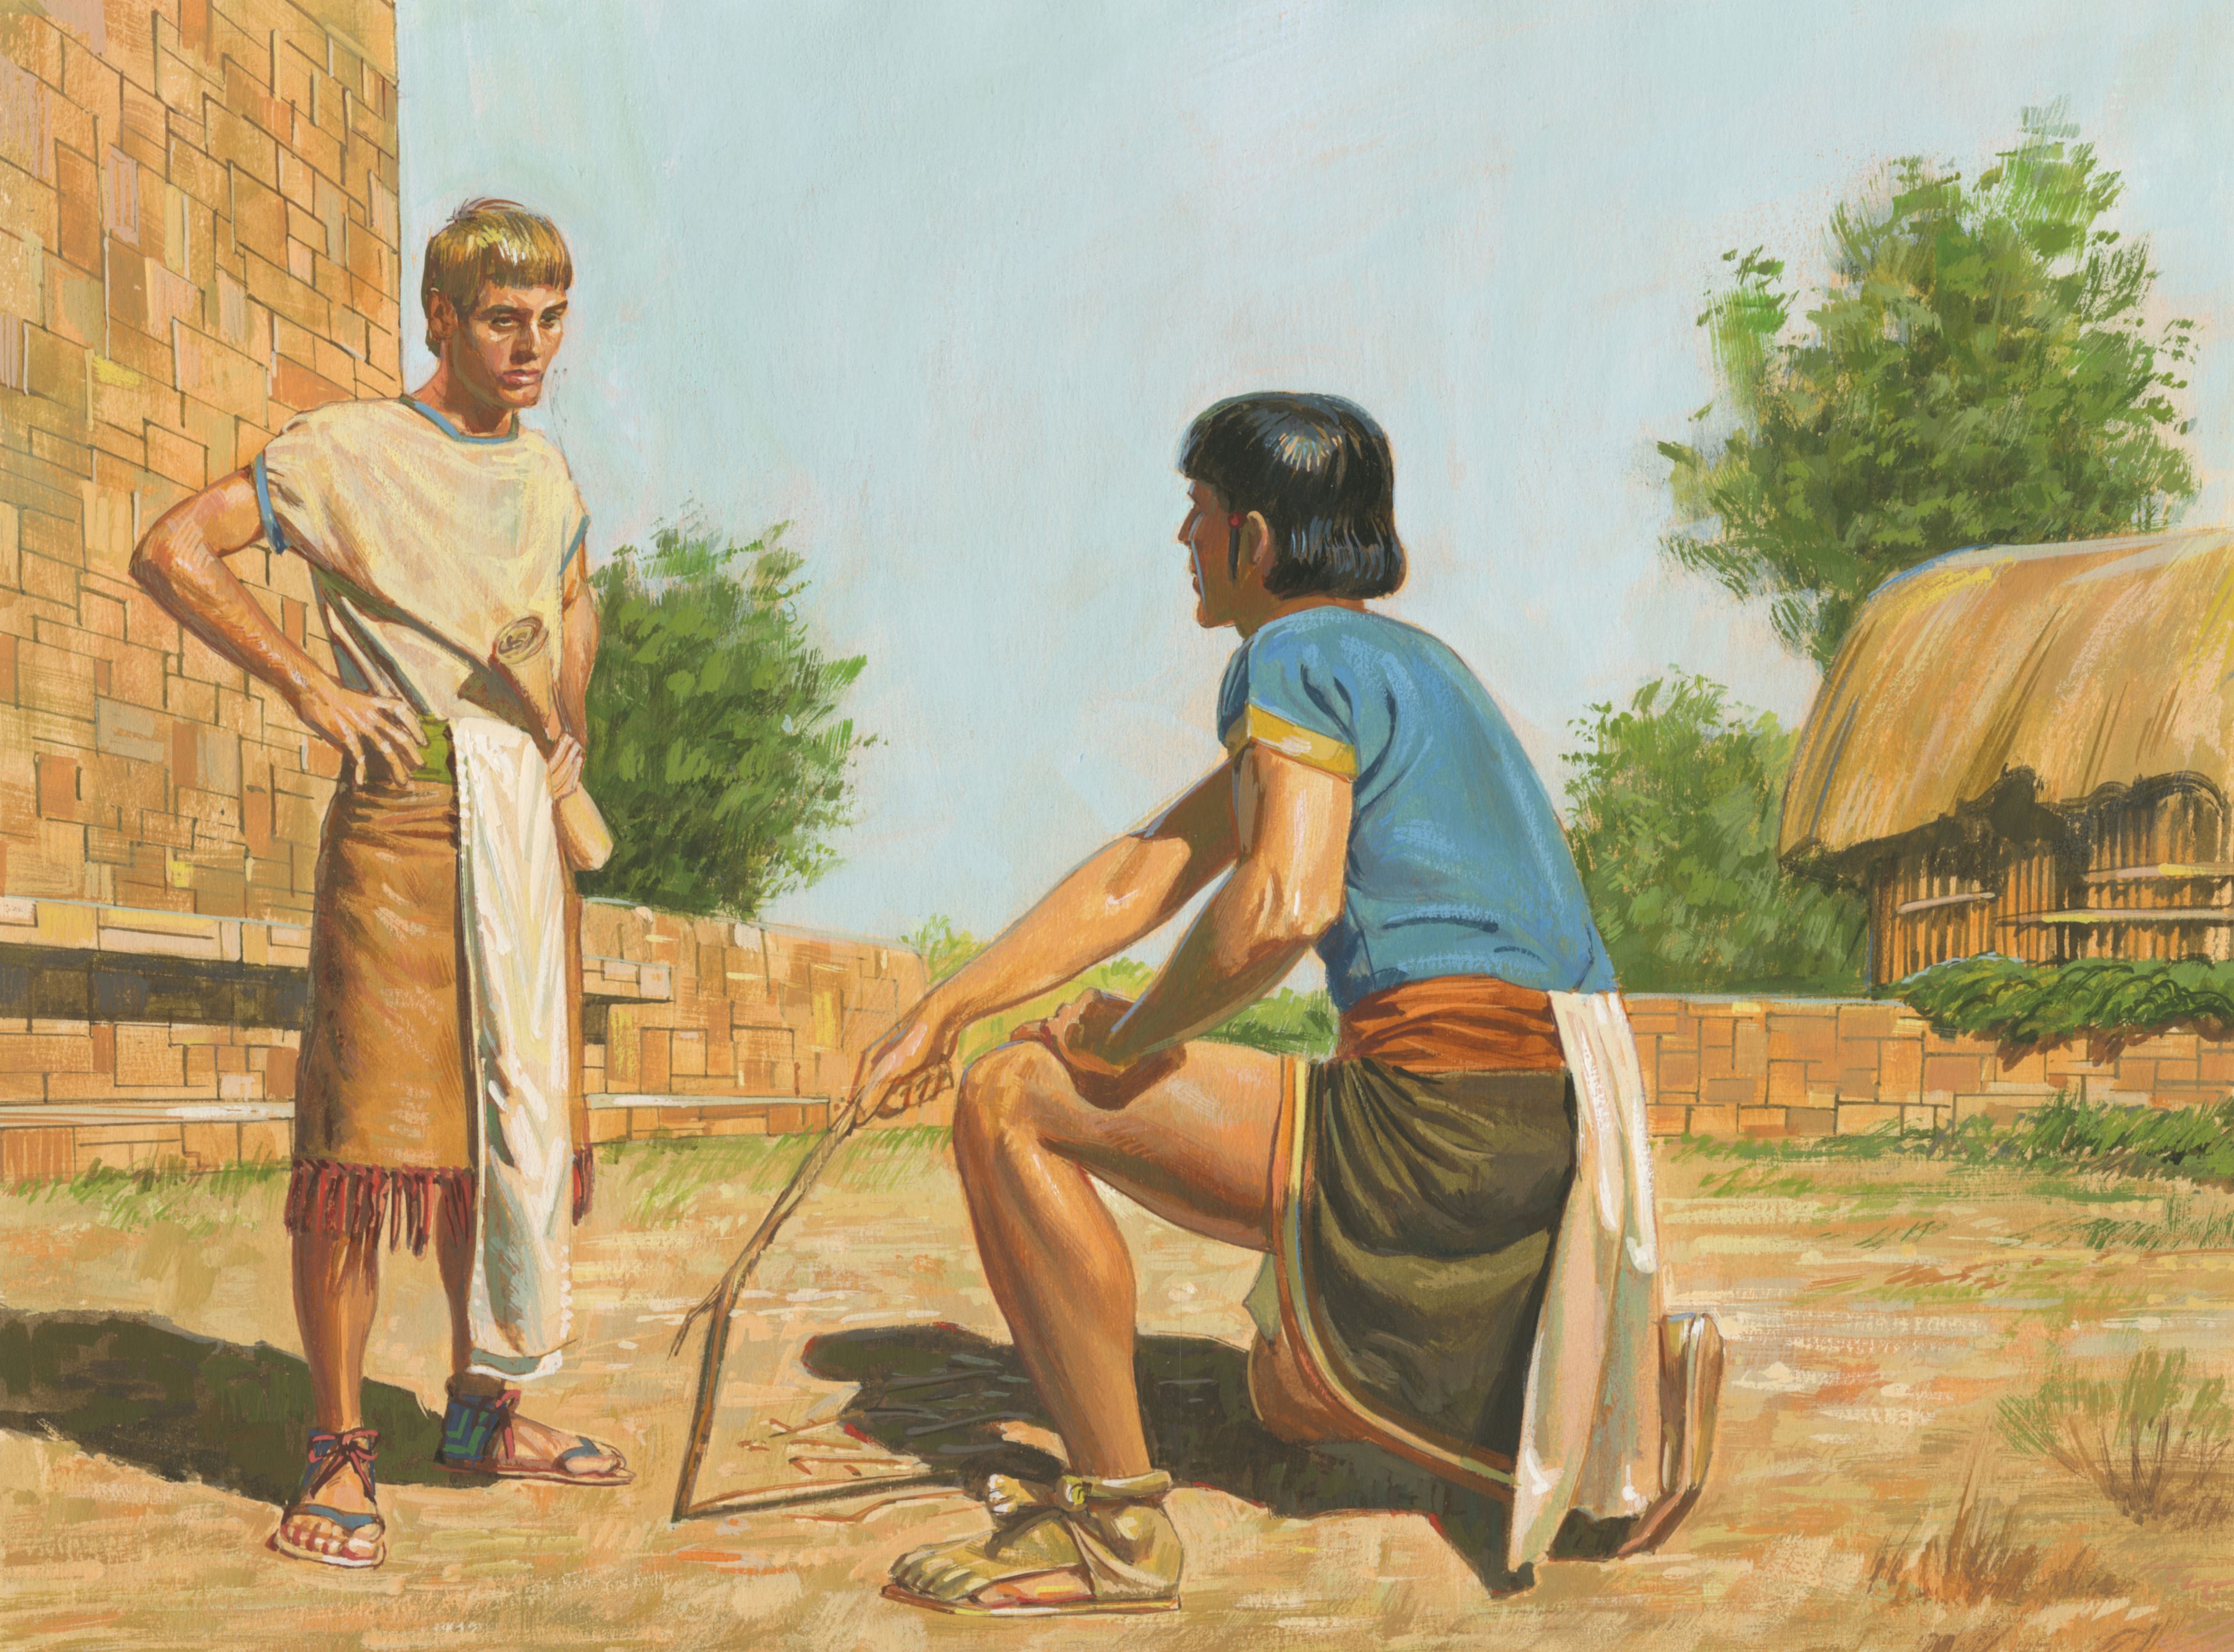 A painting by Jerry Thompson depicting Korihor admitting that he knows there is a God; Primary manual 4-35